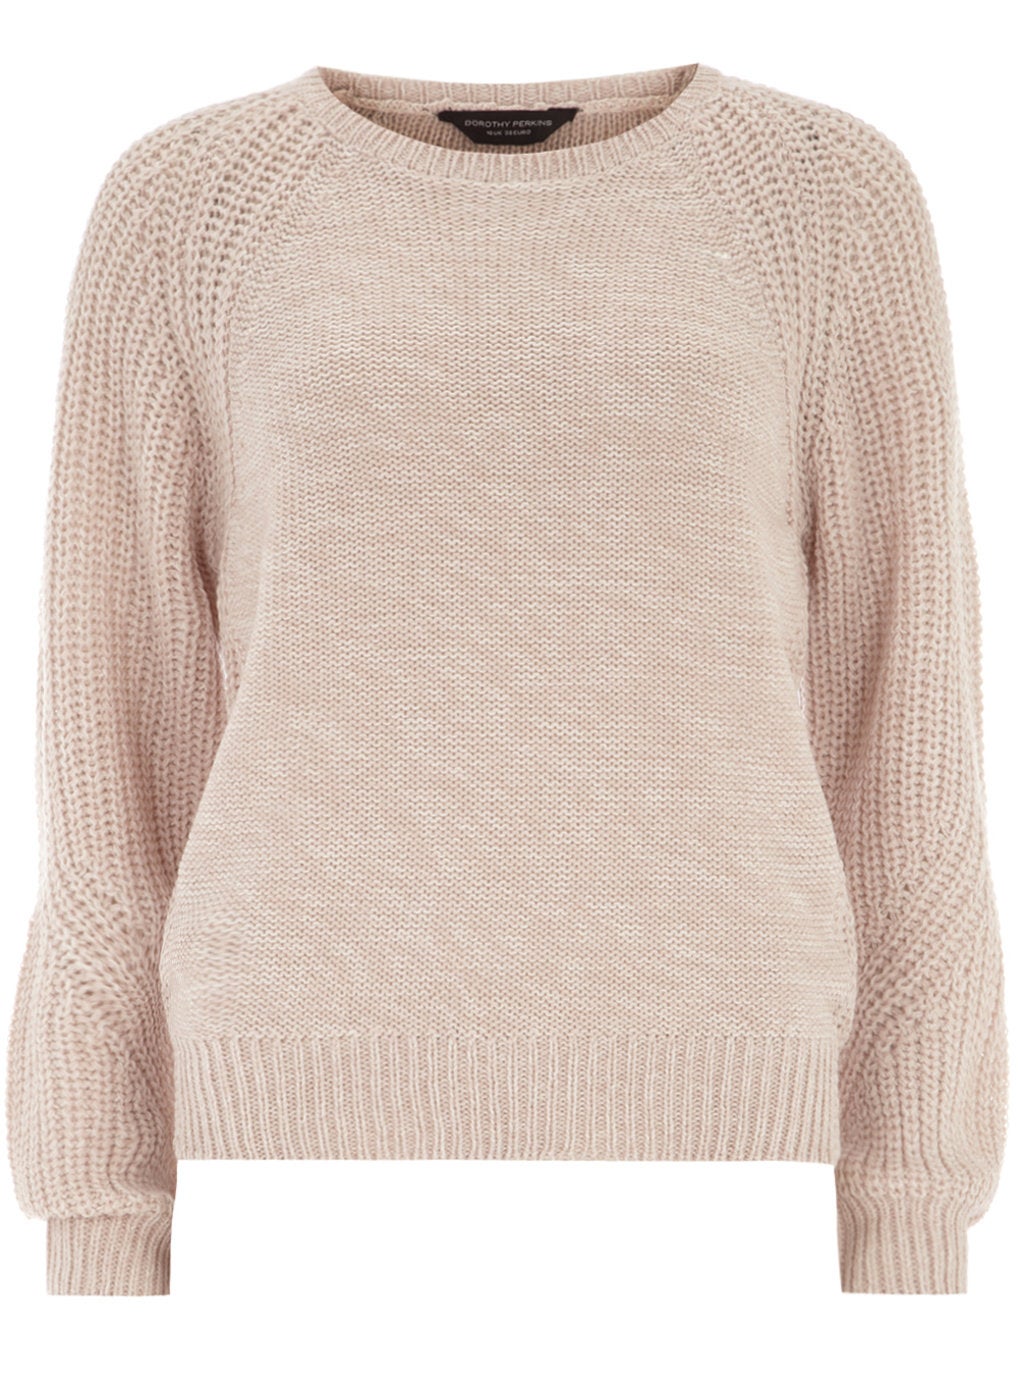 The Coziest Knits For Curvy Girls
